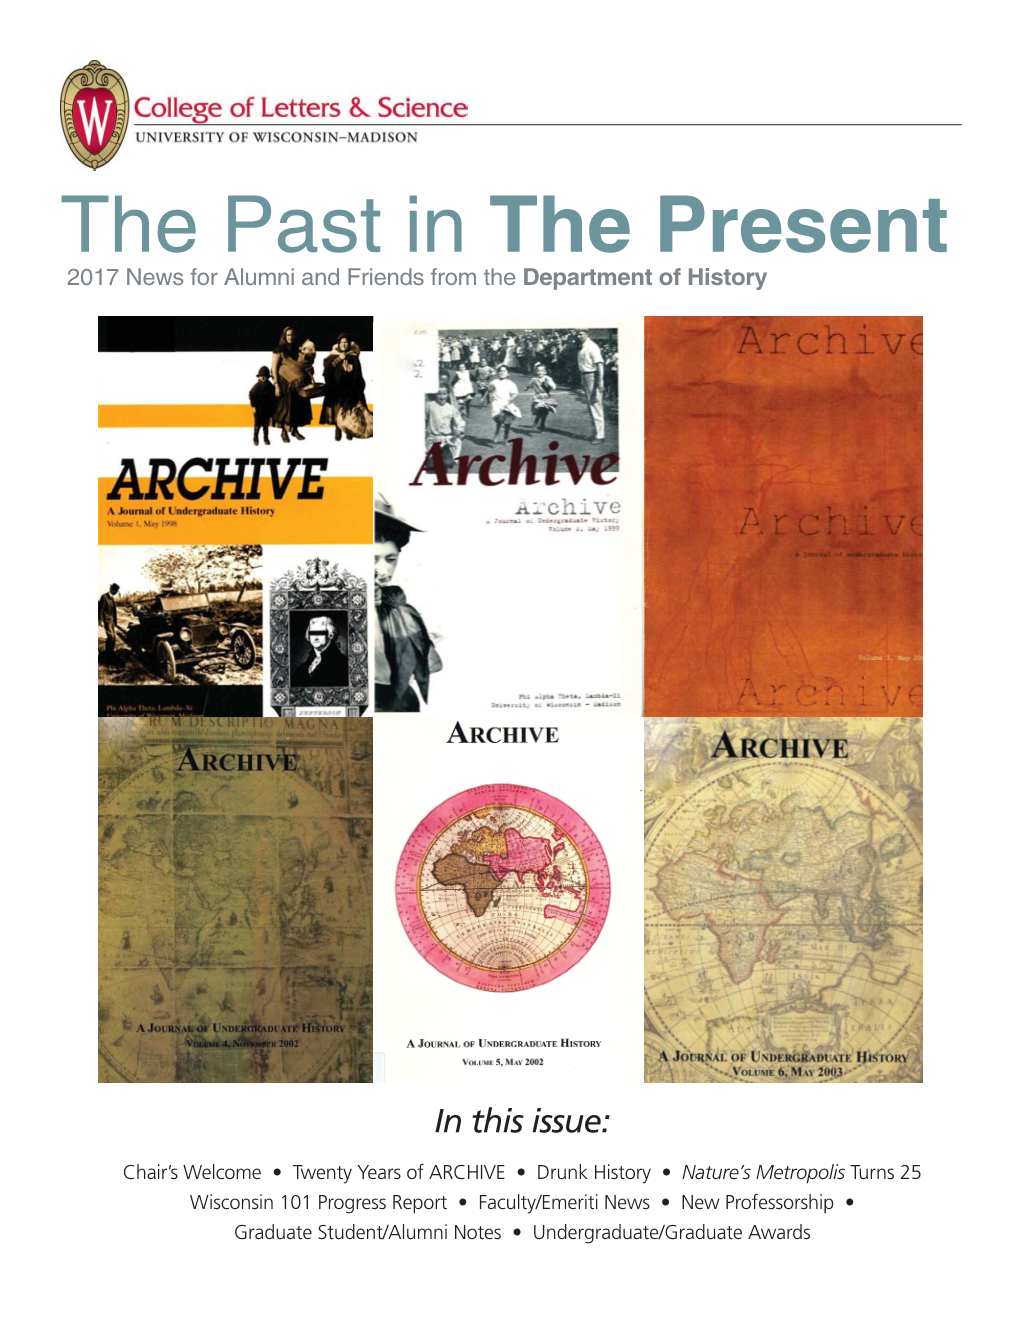 History Newsletter 2017-18 – “The Past in the Present”